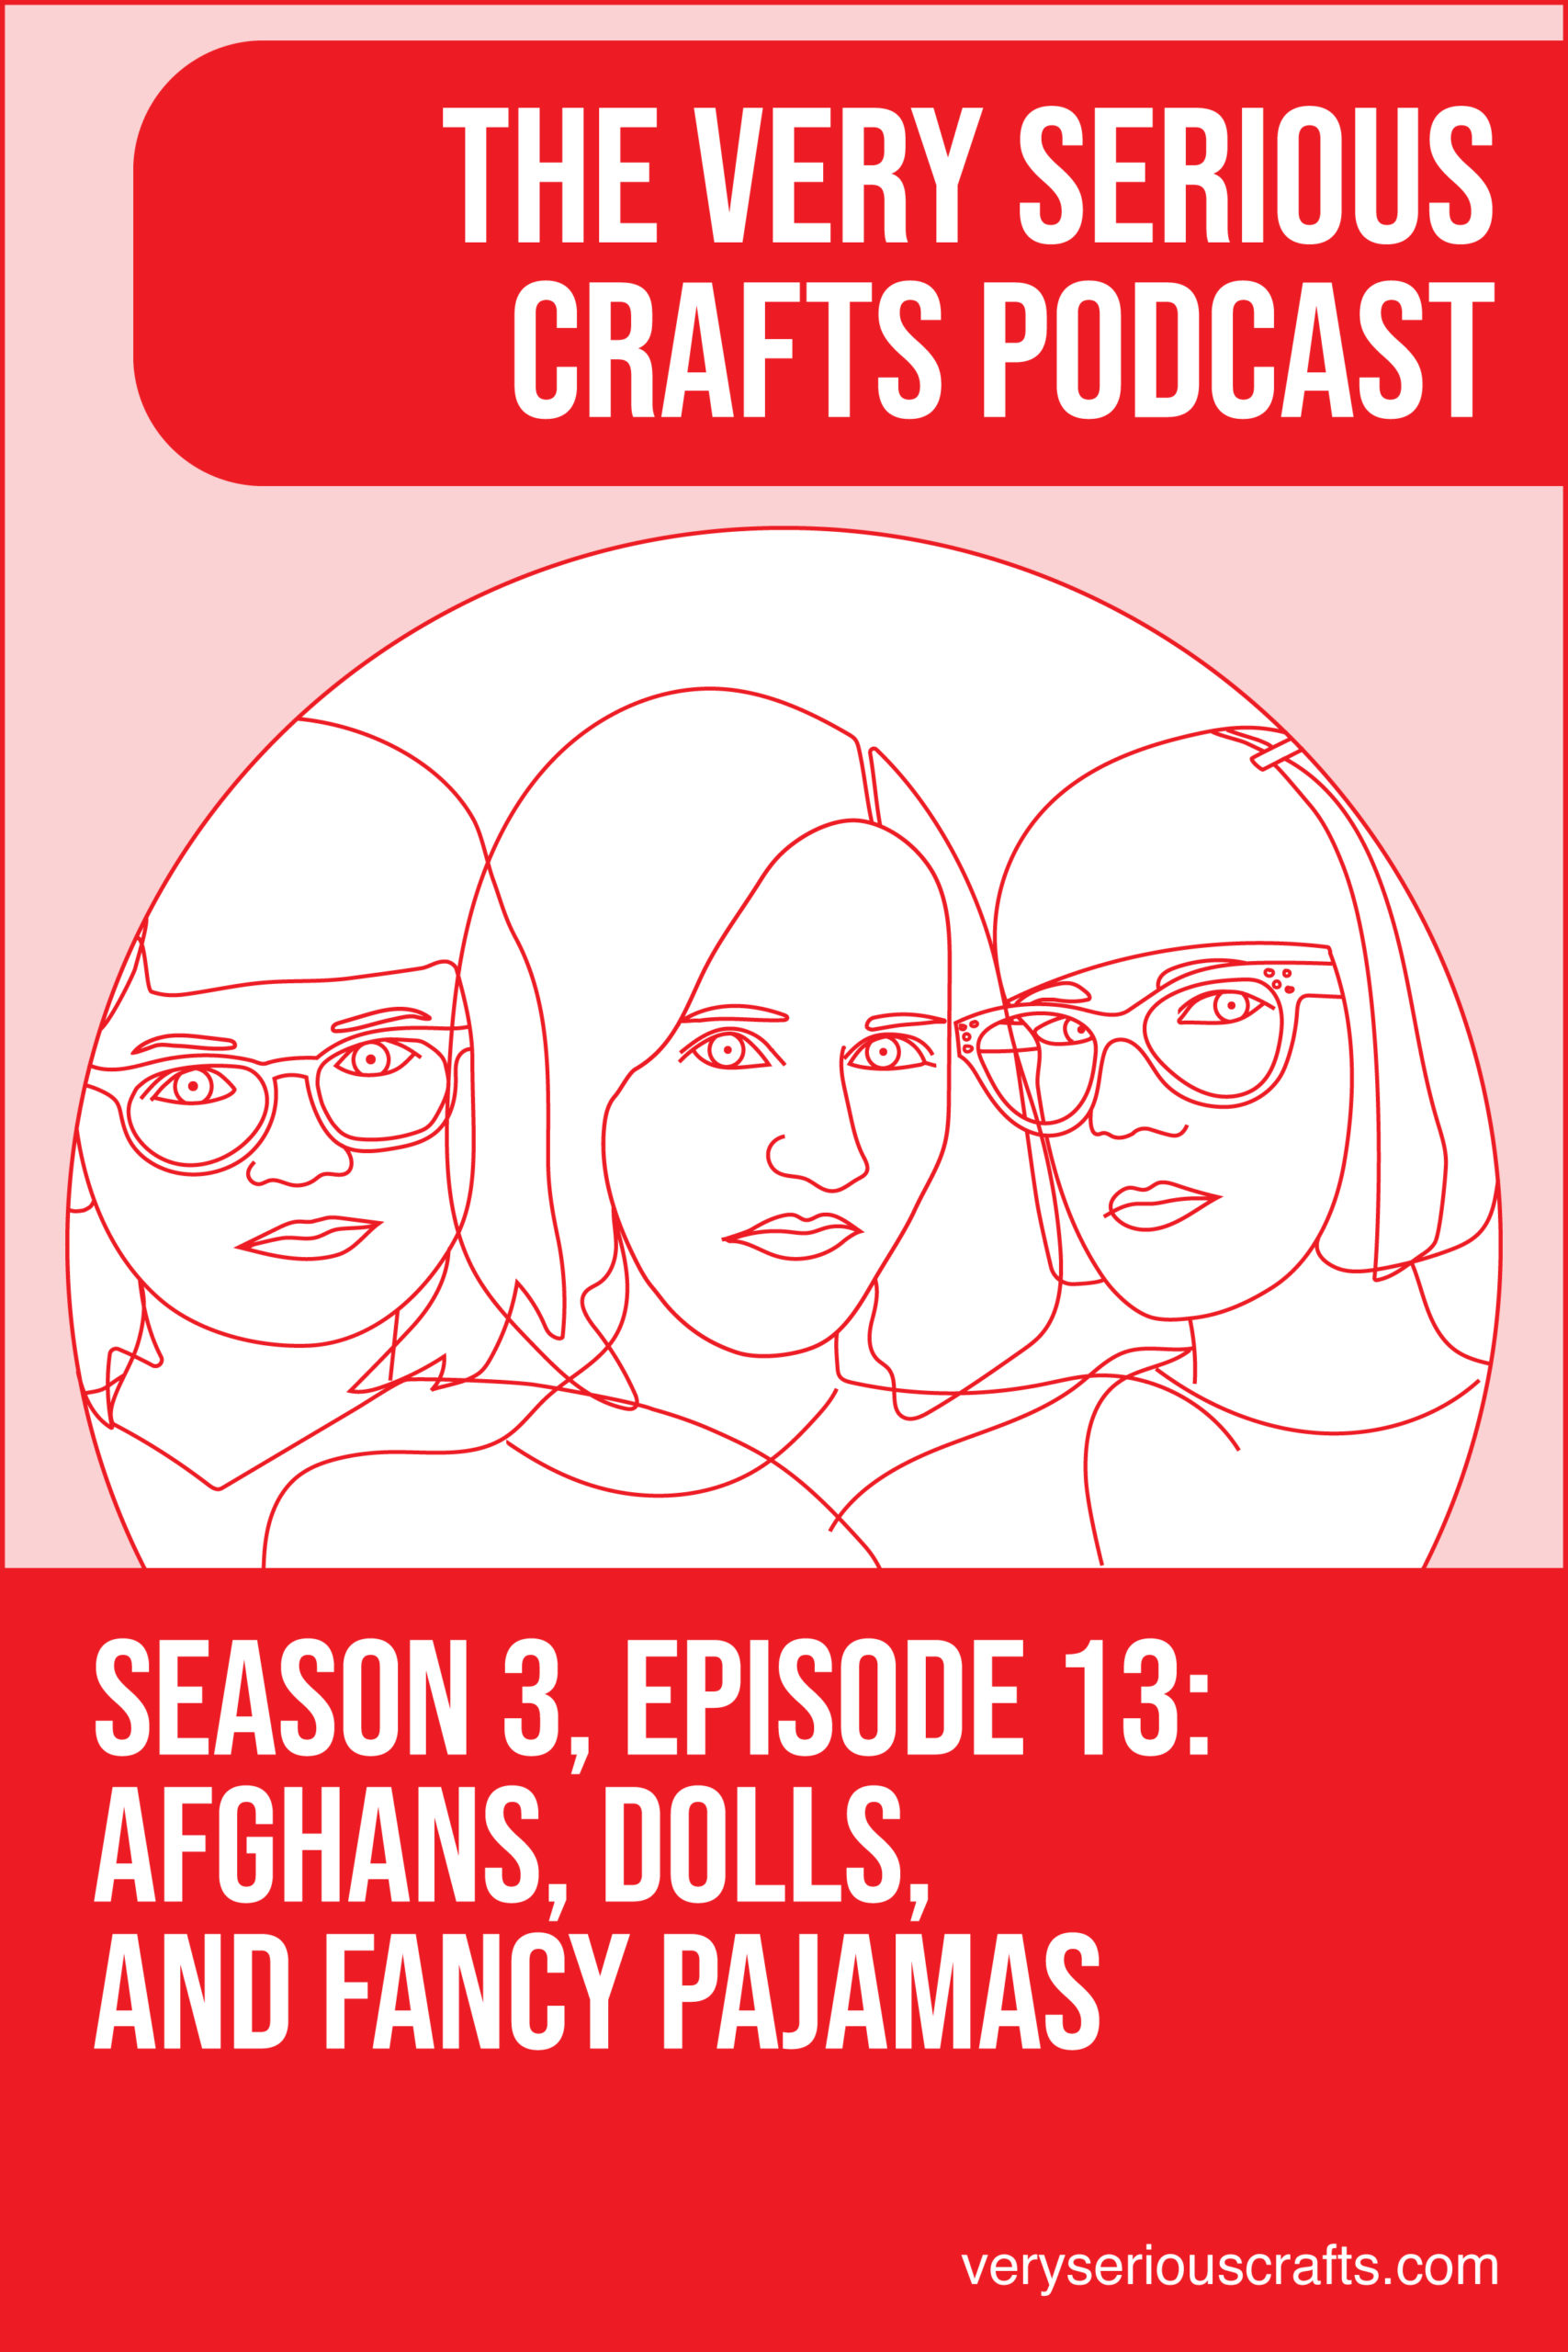 Download The Very Serious Crafts Podcast Season 3 Episode 18 Afghans Dolls And Fancy Pajamas SVG Cut Files